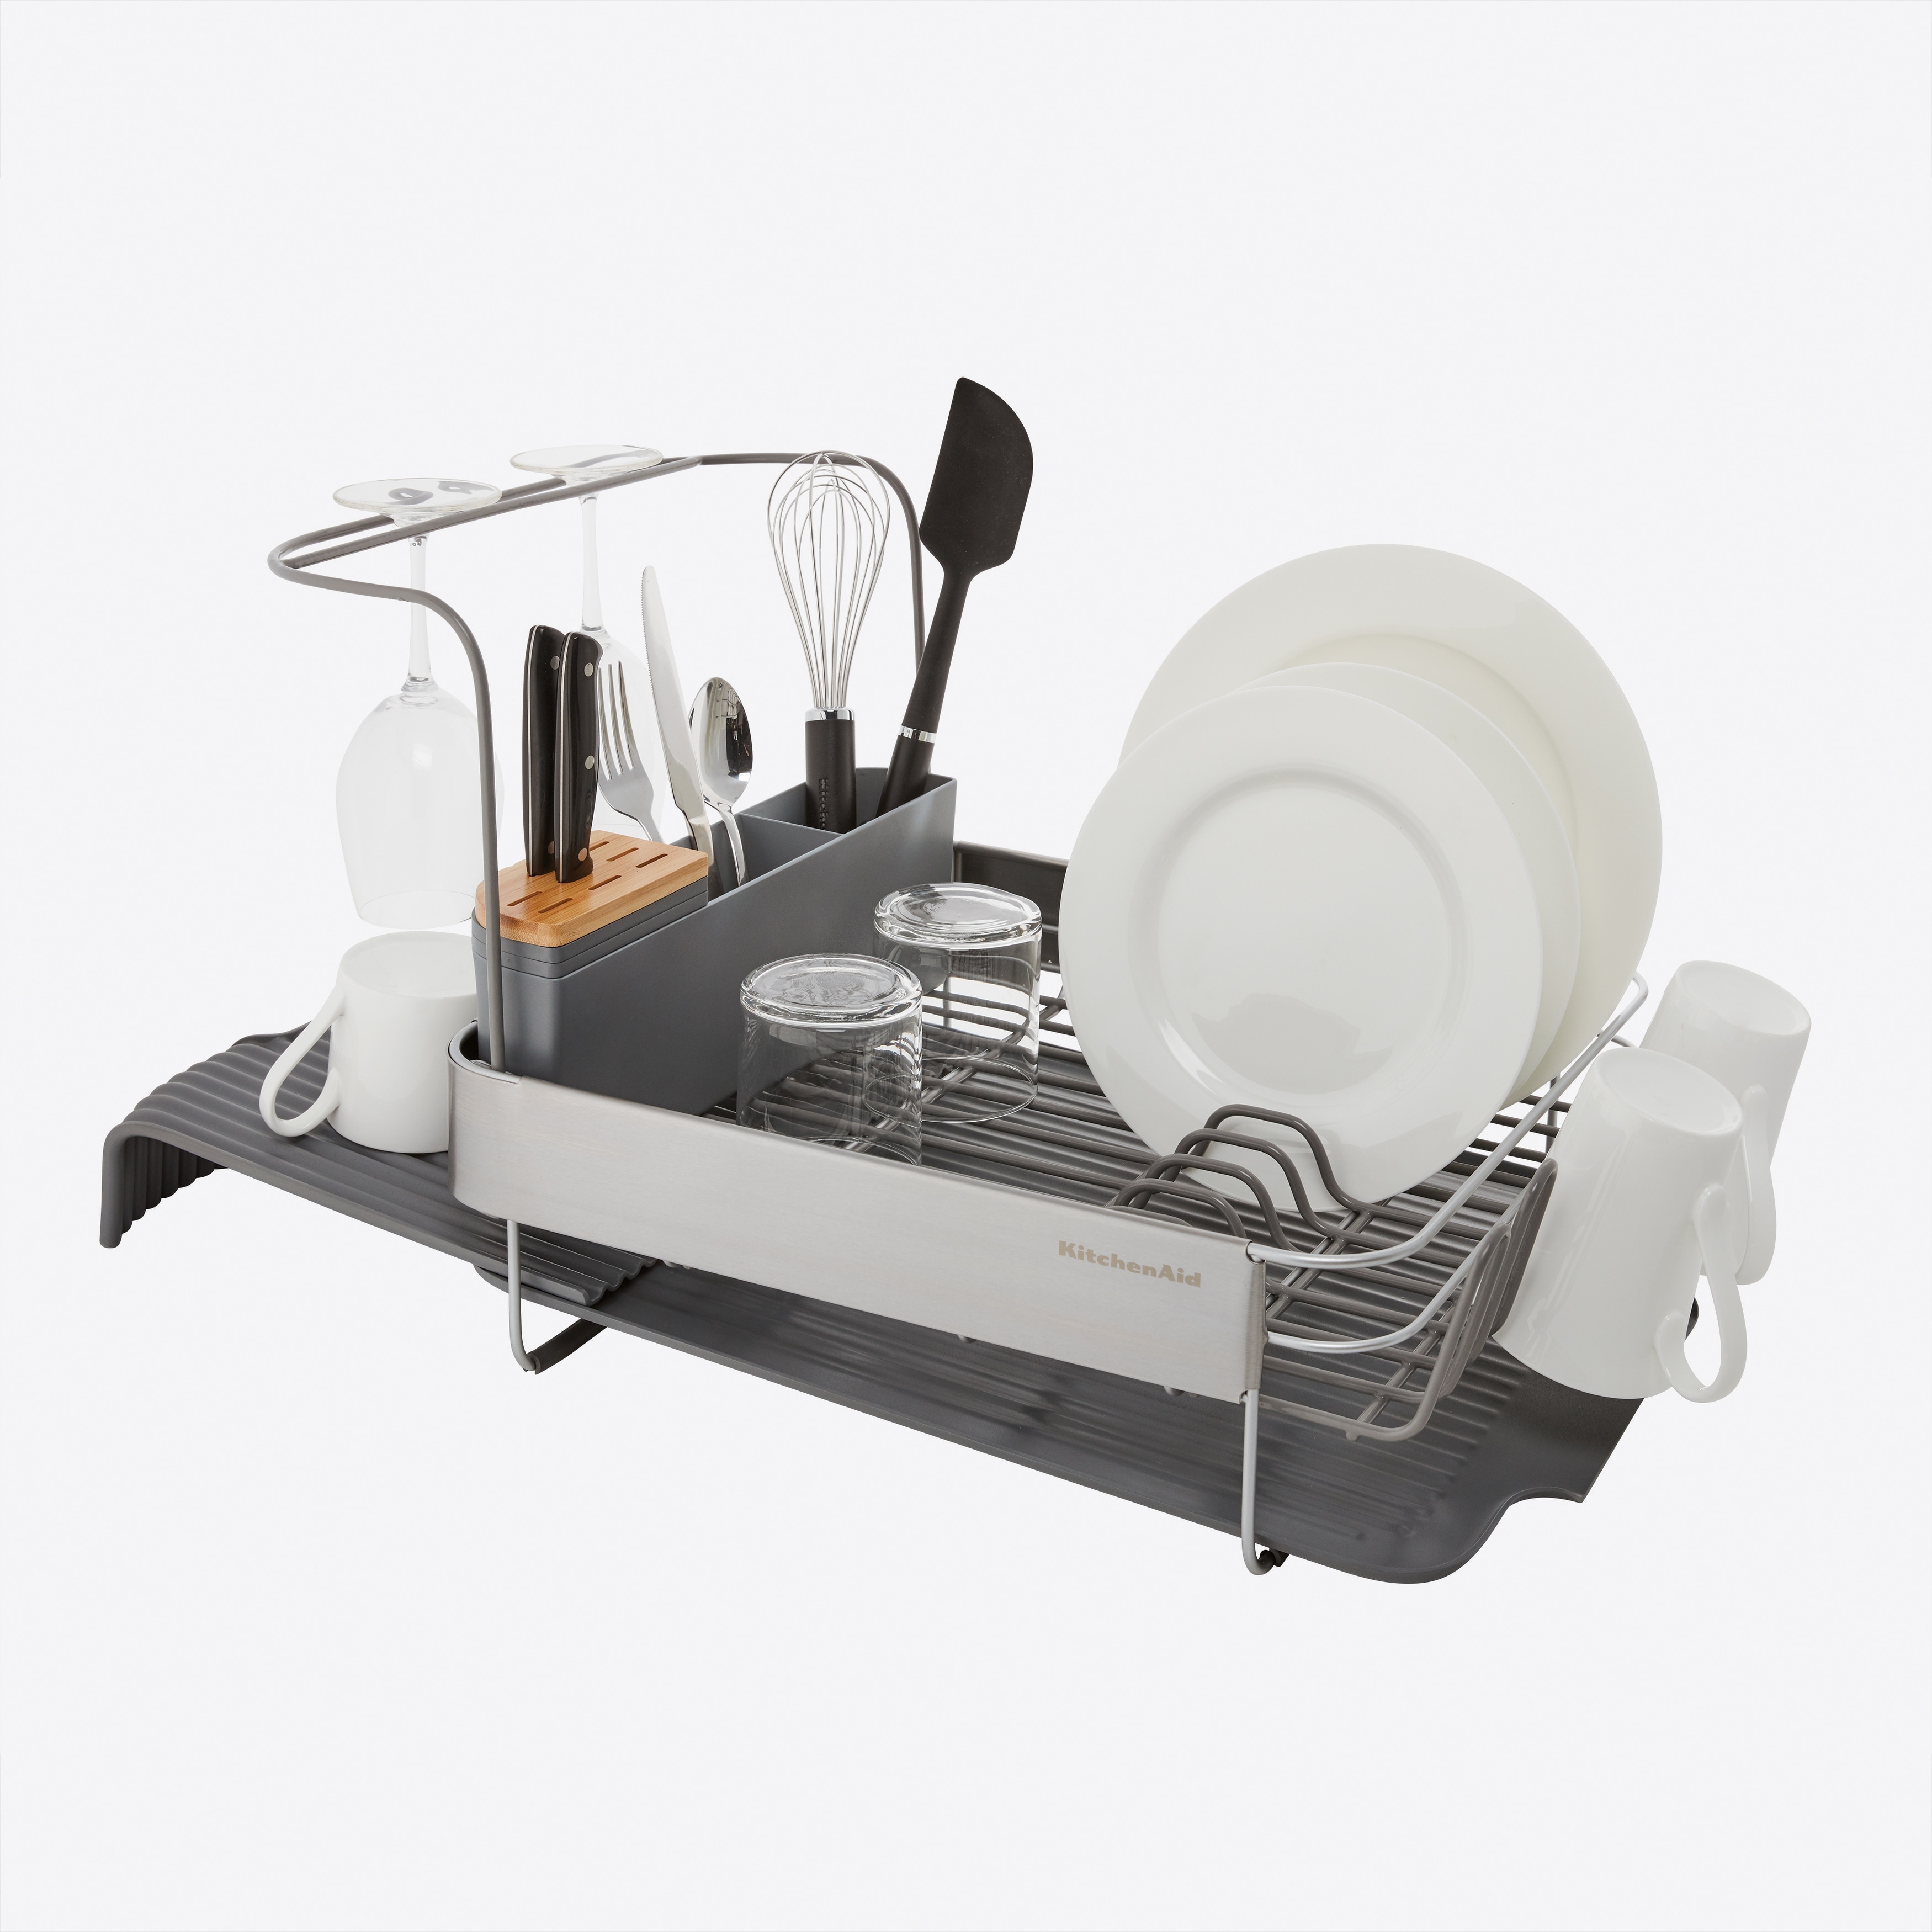 https://ak1.ostkcdn.com/images/products/is/images/direct/1ca49e11b03dc07cc12cf68322f62272fd6cd805/KitchenAid-Full-Size-Expandable-Dish-Drying-Rack%2C-24-Inch.jpg